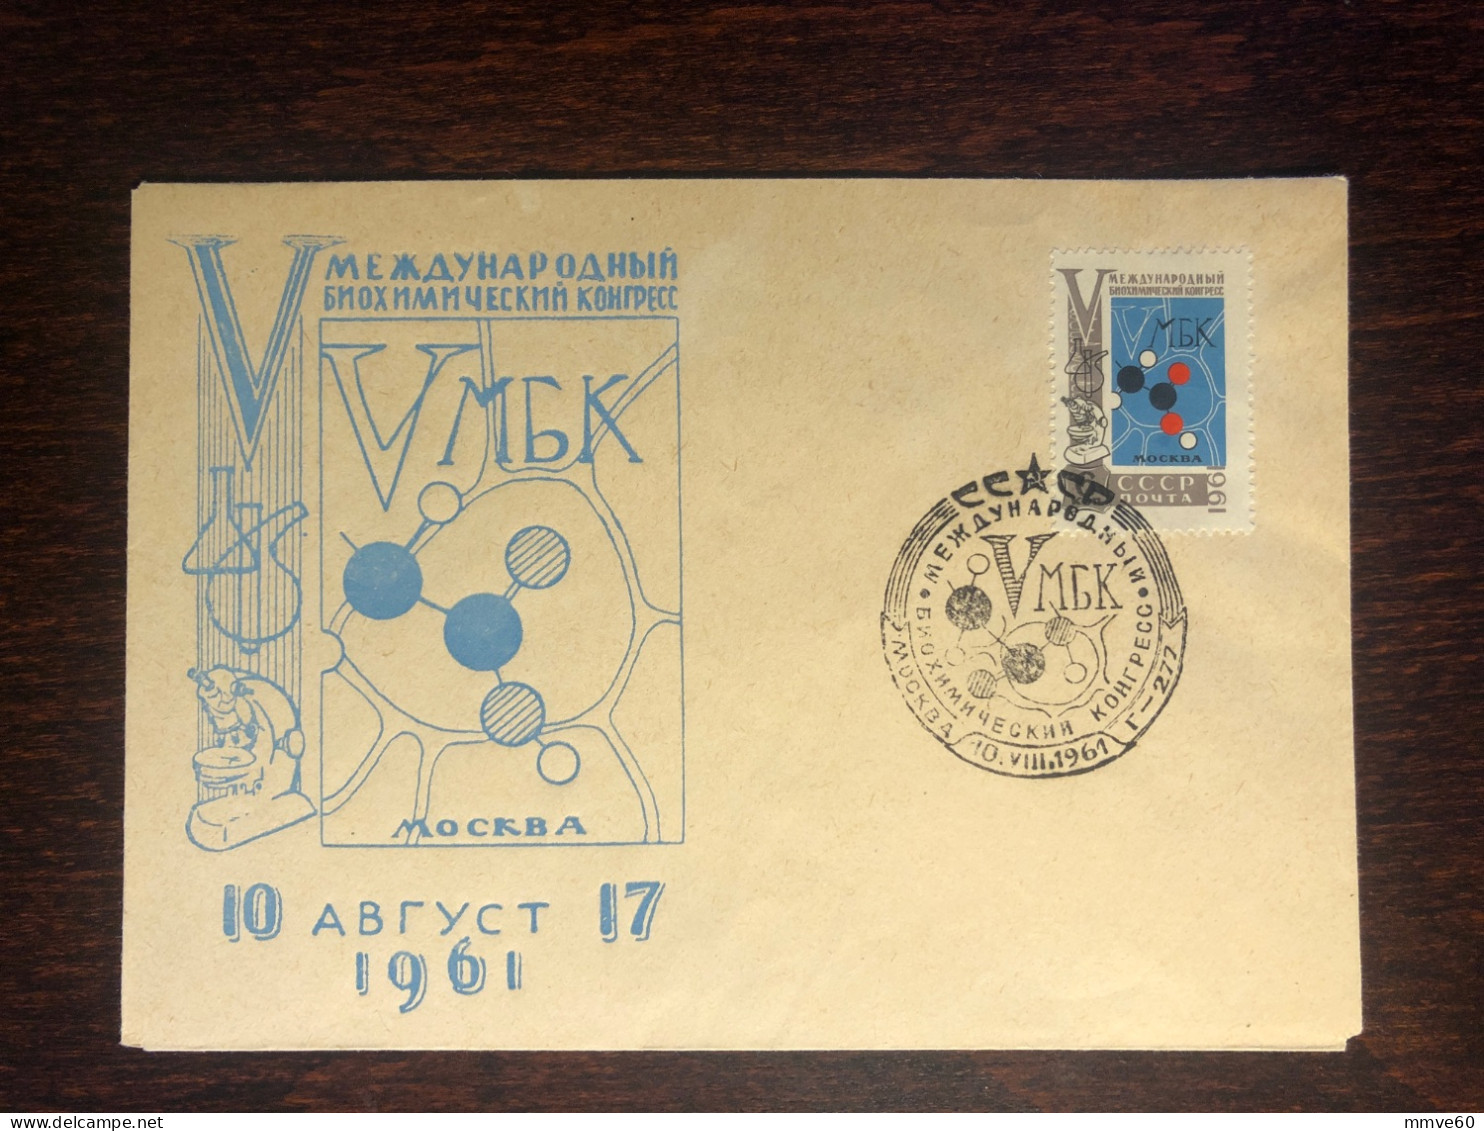 RUSSIA USSR FDC COVER 1961 YEAR BIOCHEMISTRY CONGRESS HEALTH MEDICINE STAMPS - Covers & Documents